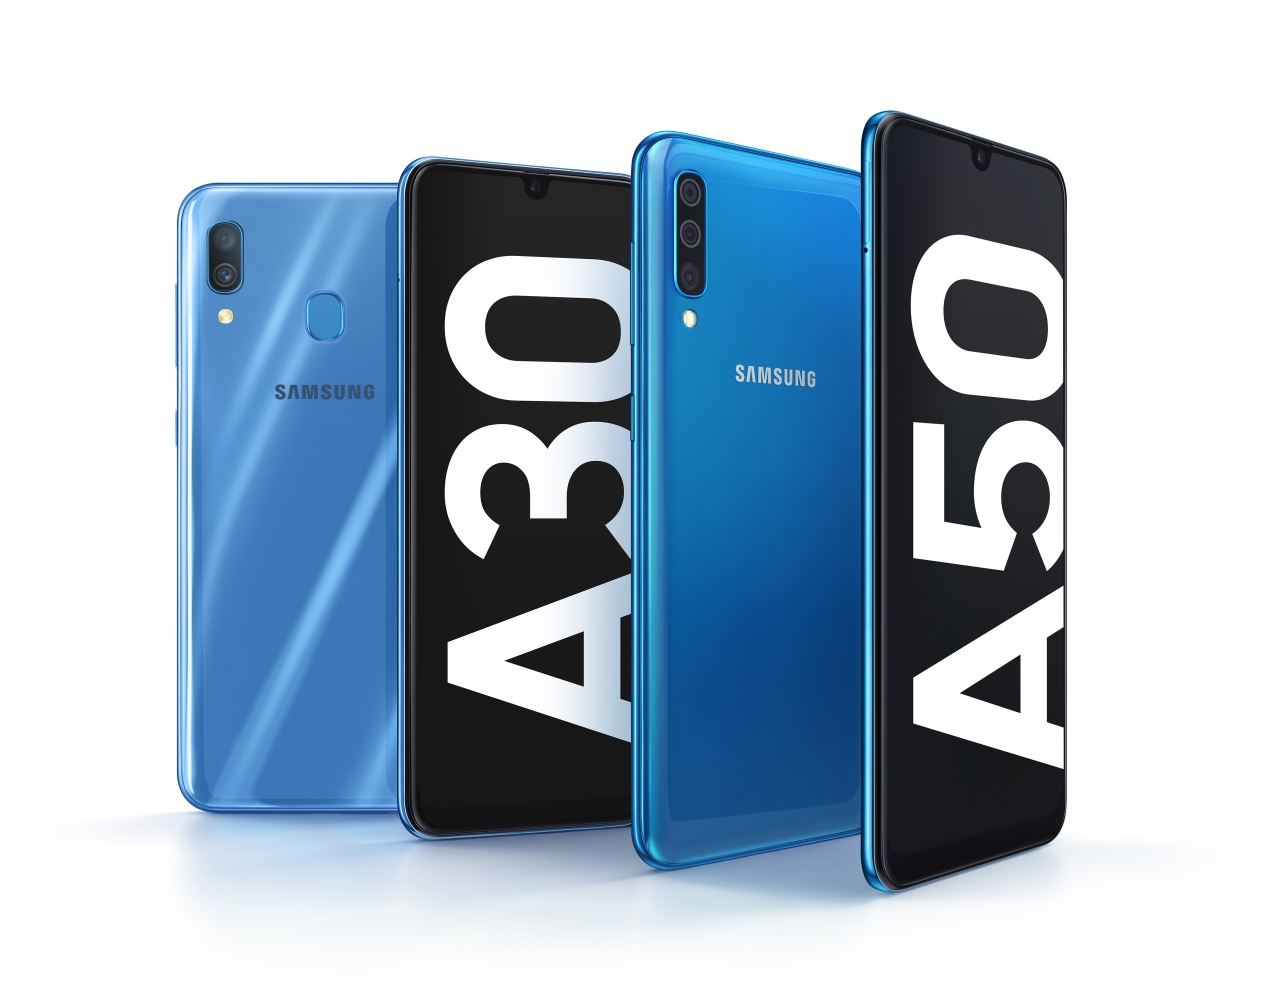 Samsung takes aim at the mid-range with the new Galaxy A Series